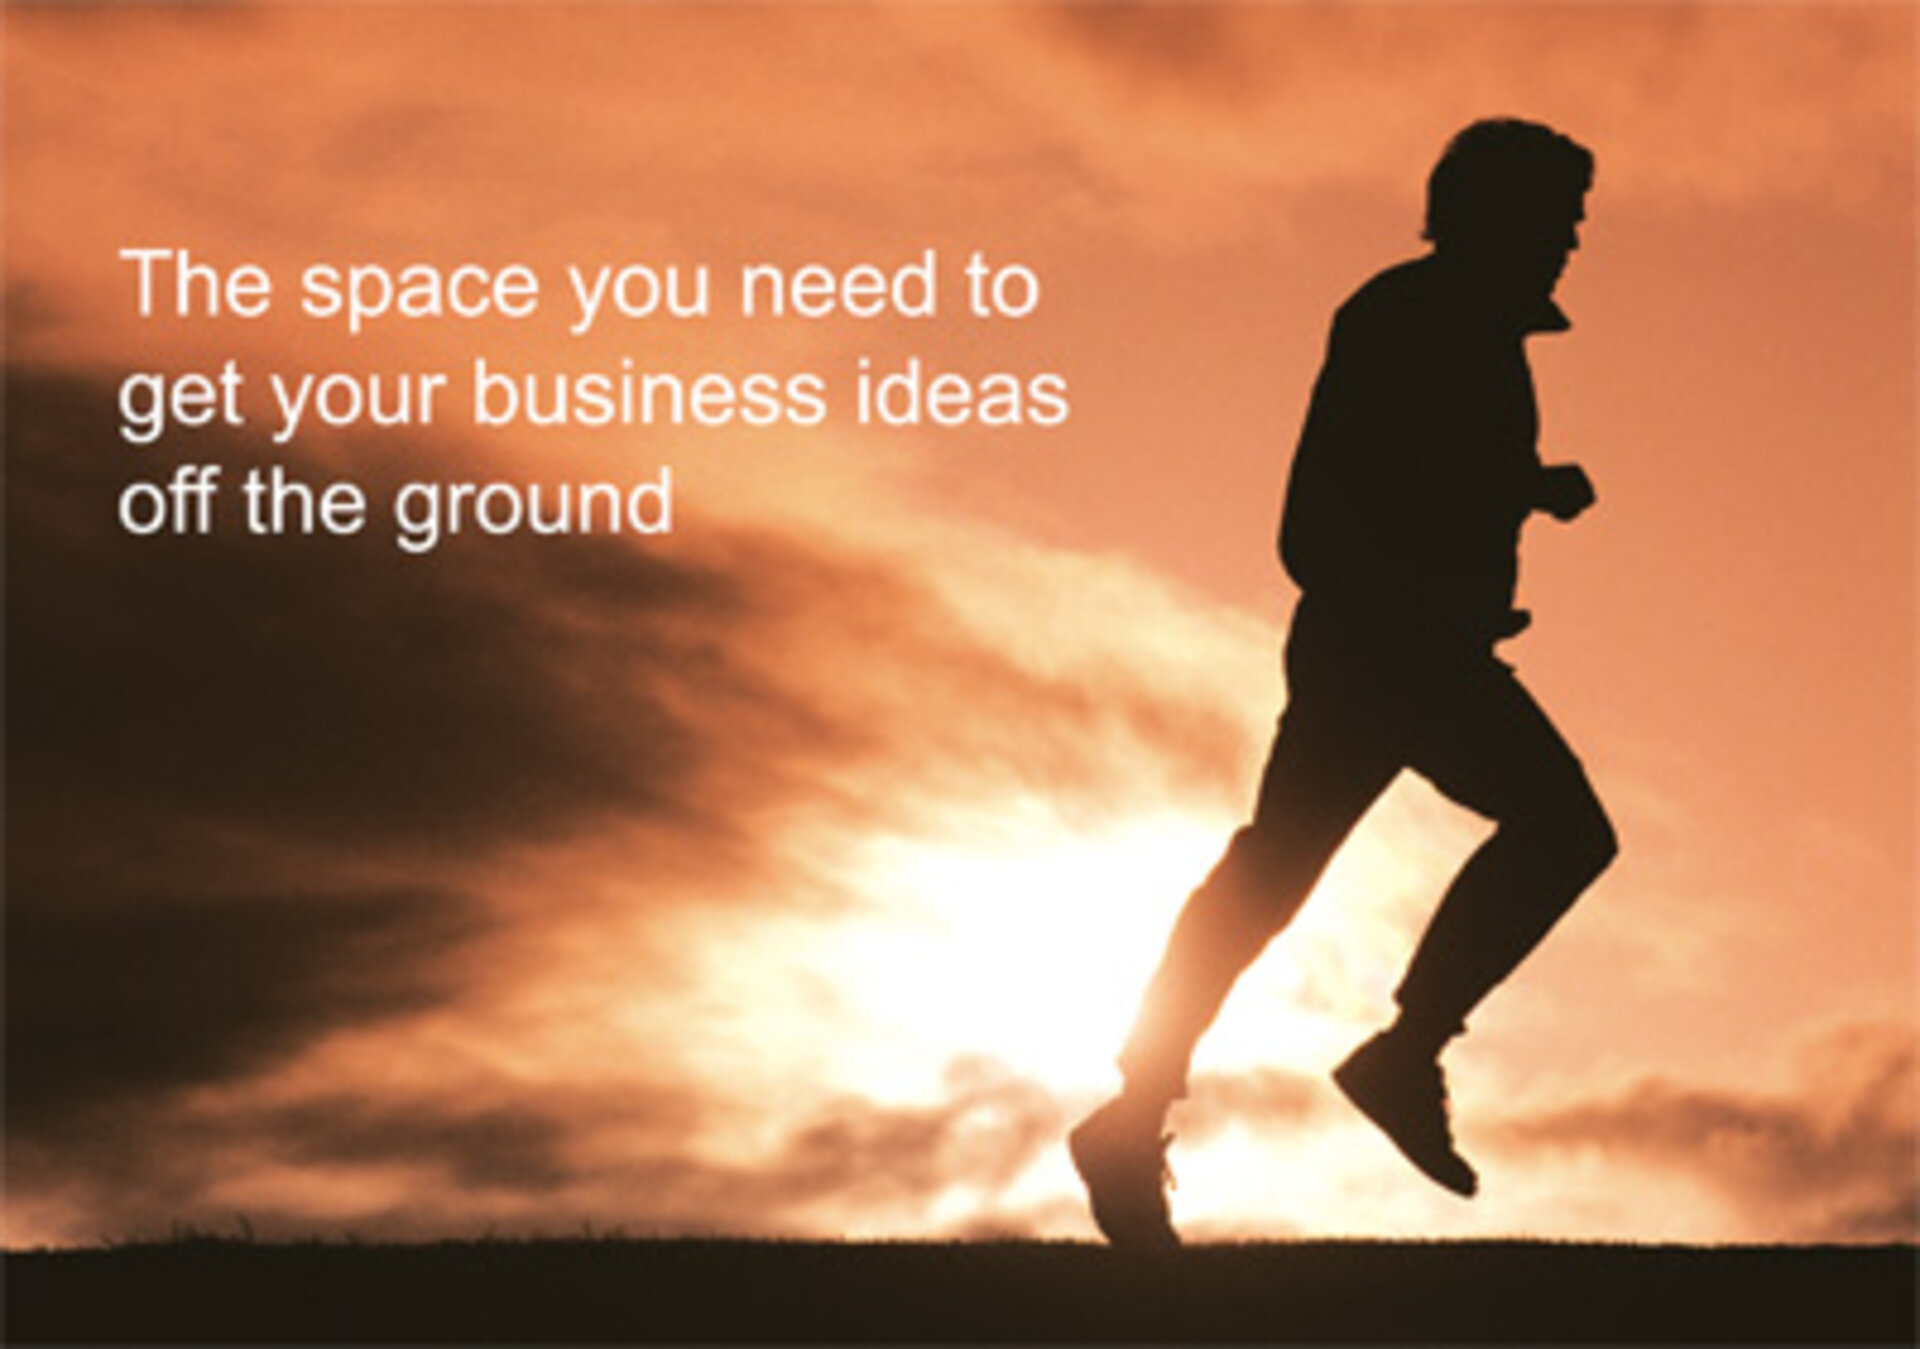 The space you need to get your business off the ground